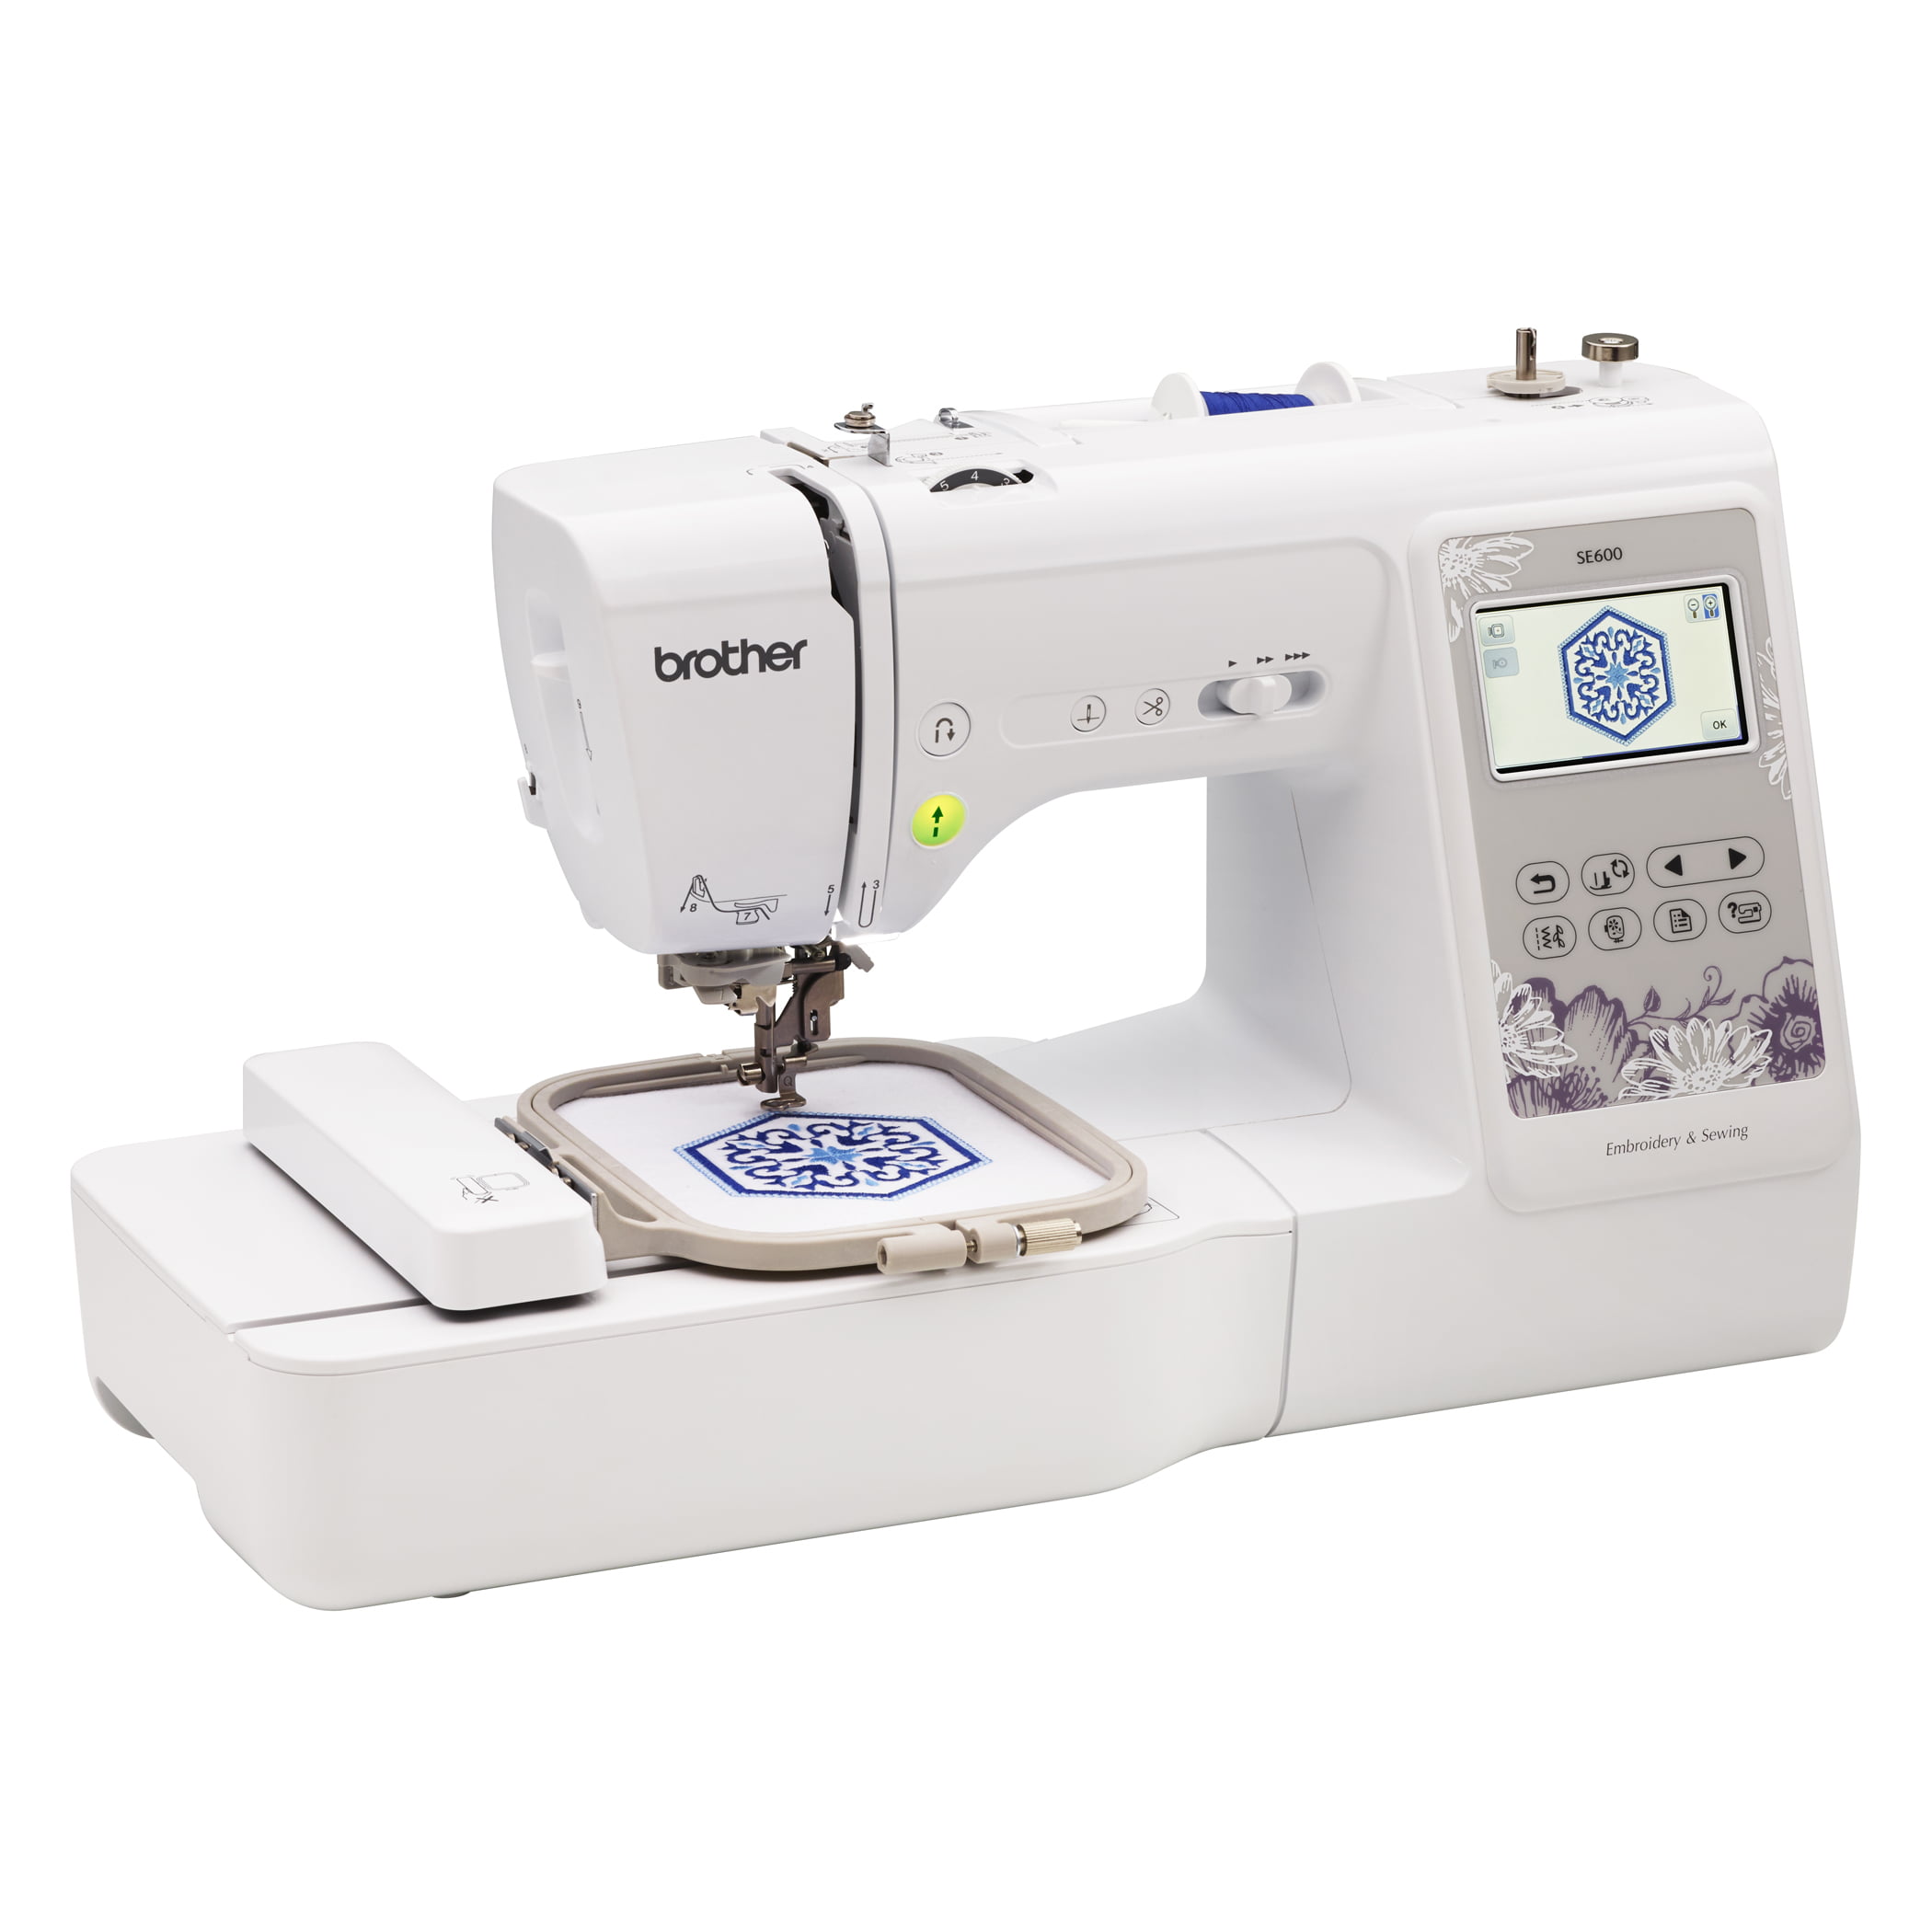 Buy Brother SE600 Combination Computerized Sewing and Embroidery Machine Online in Nigeria. 589039436